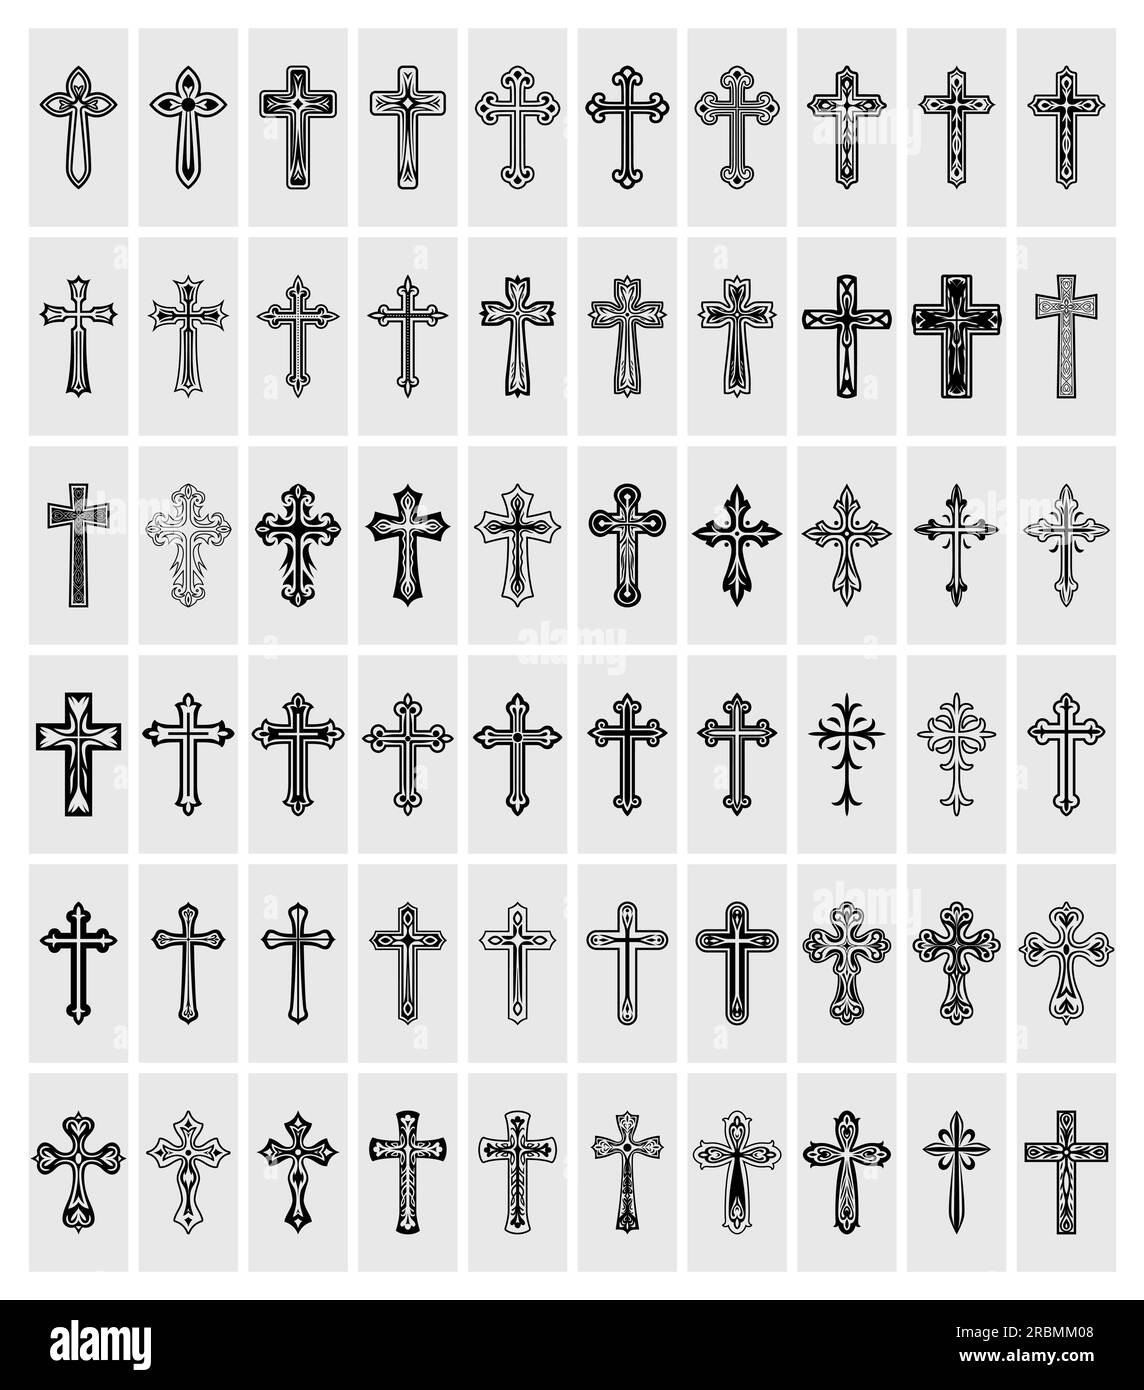 Flat Vector Christian Cross Icons. Line Silhouette Cut Out Black Christian Crosses Collection Isolated. Stock Vector